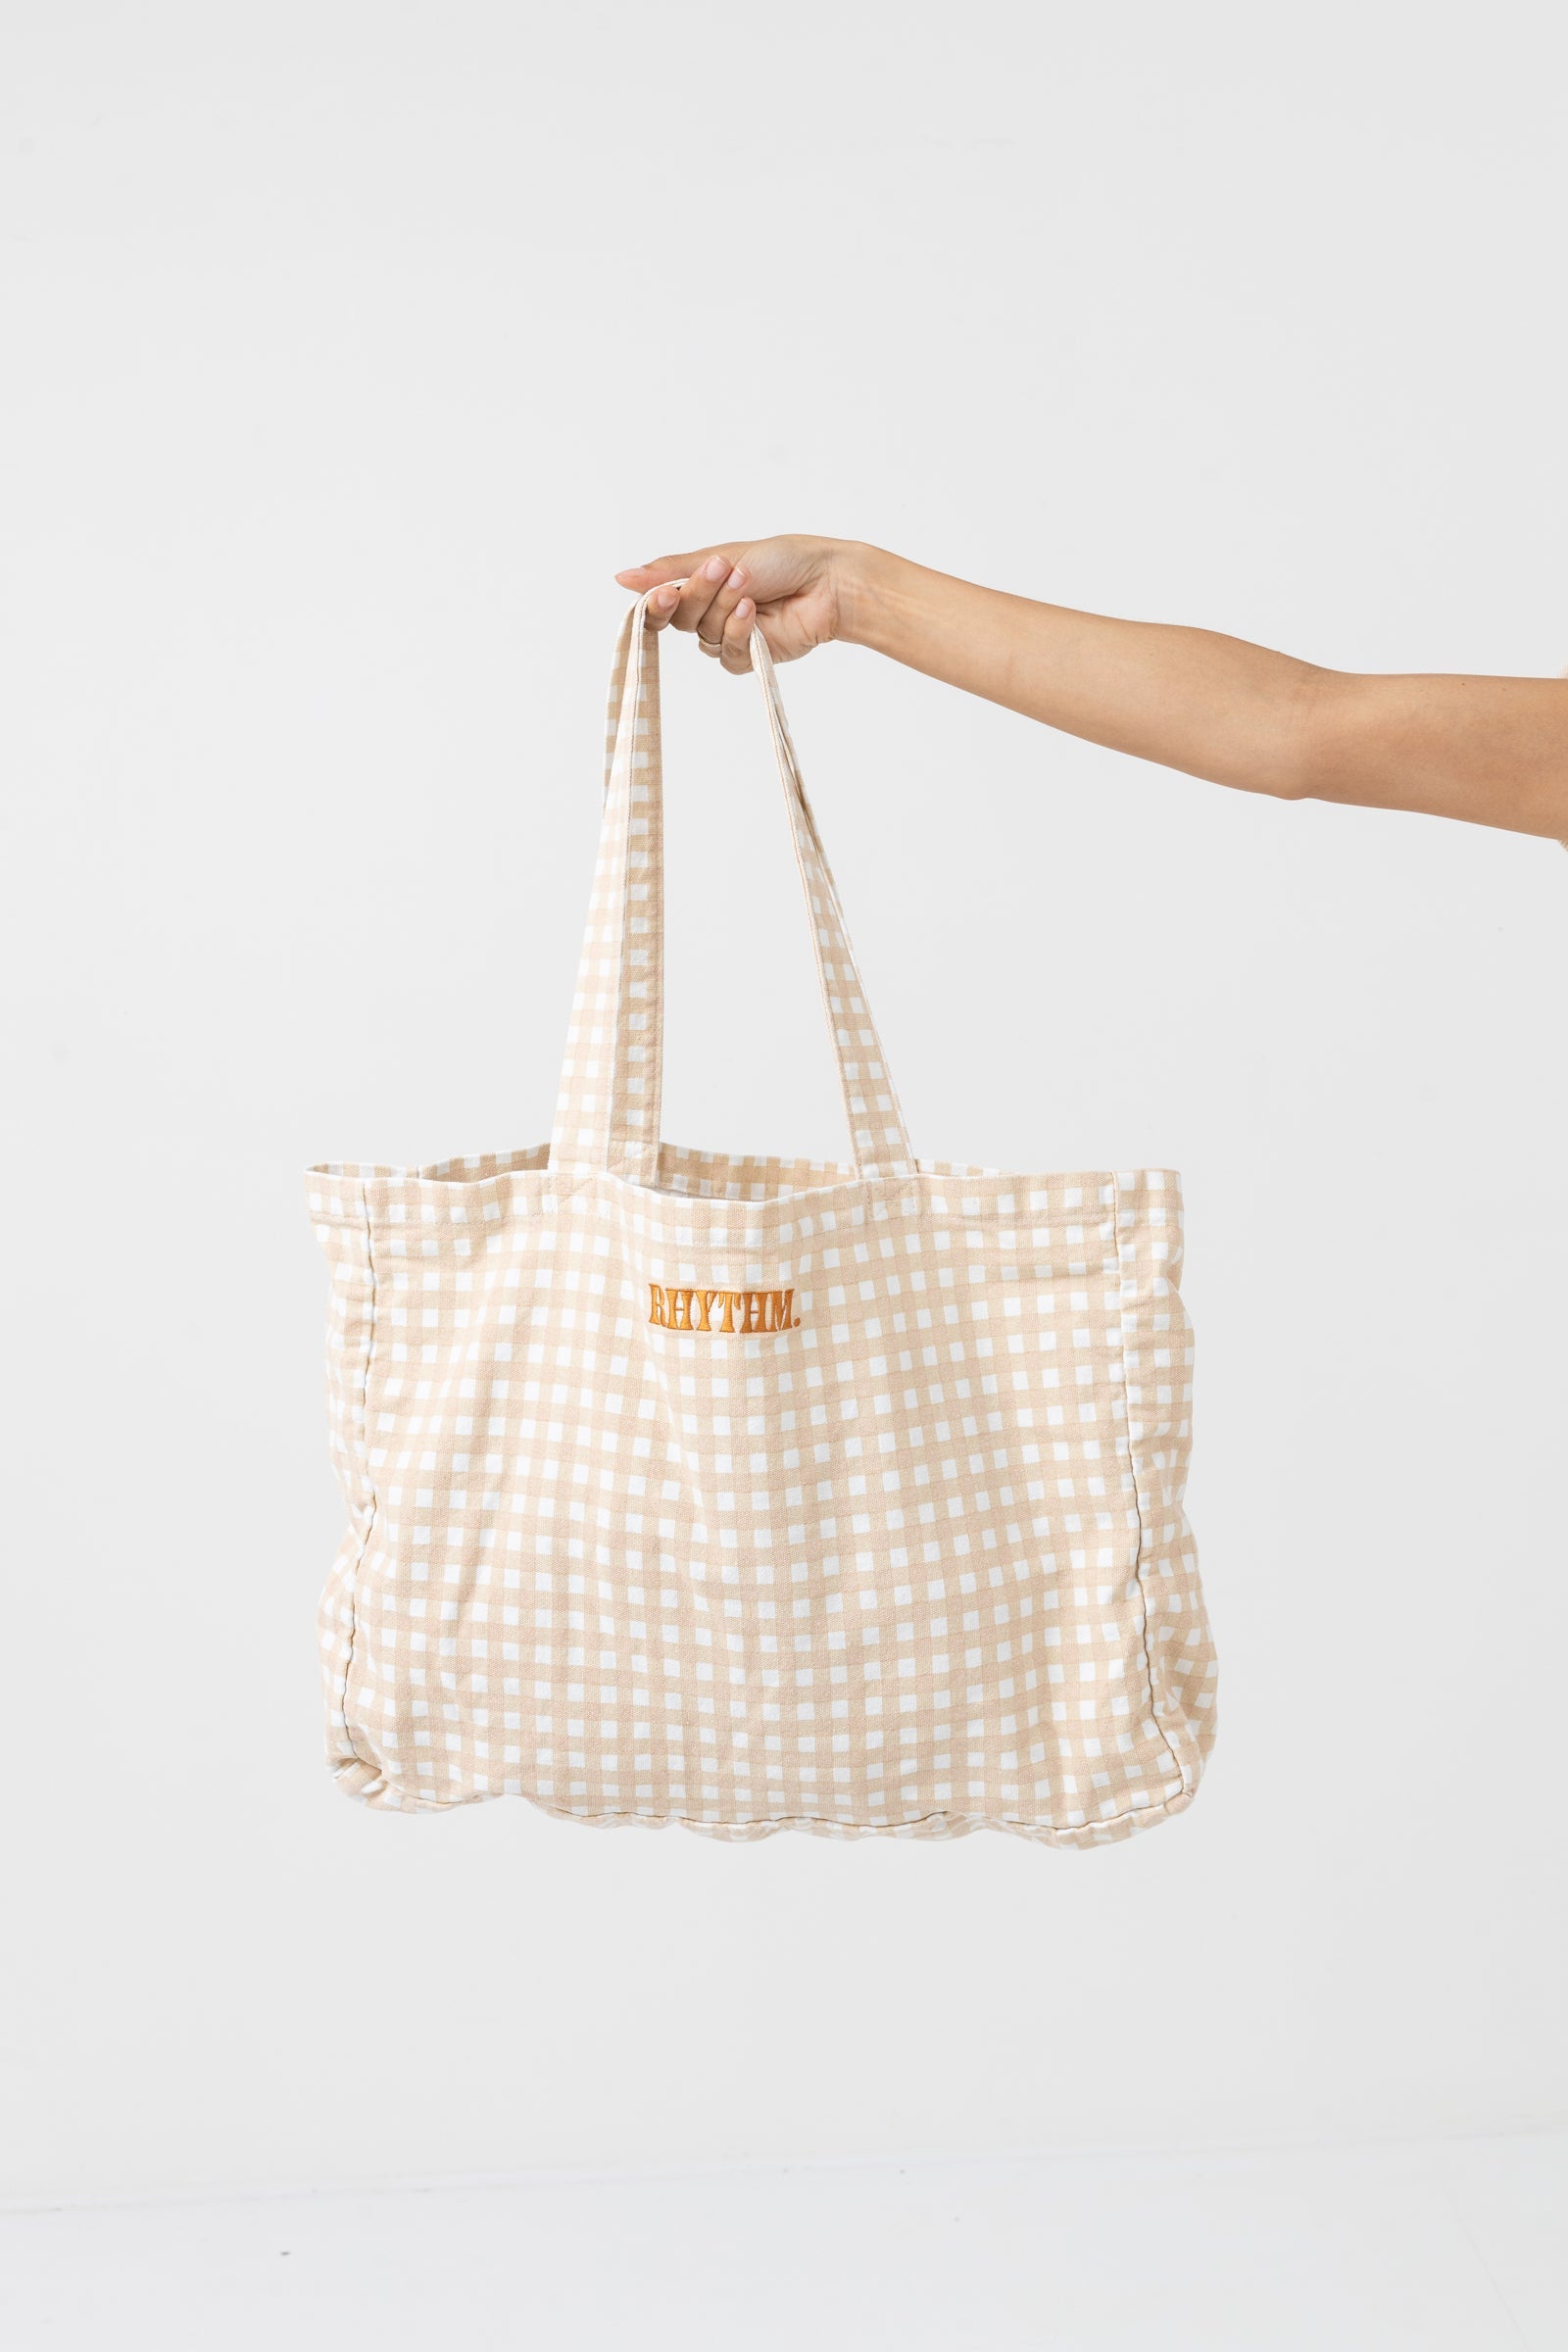 Checkered Tote with pouch(Cream, Brown, Black) – Lola Monroe Boutique